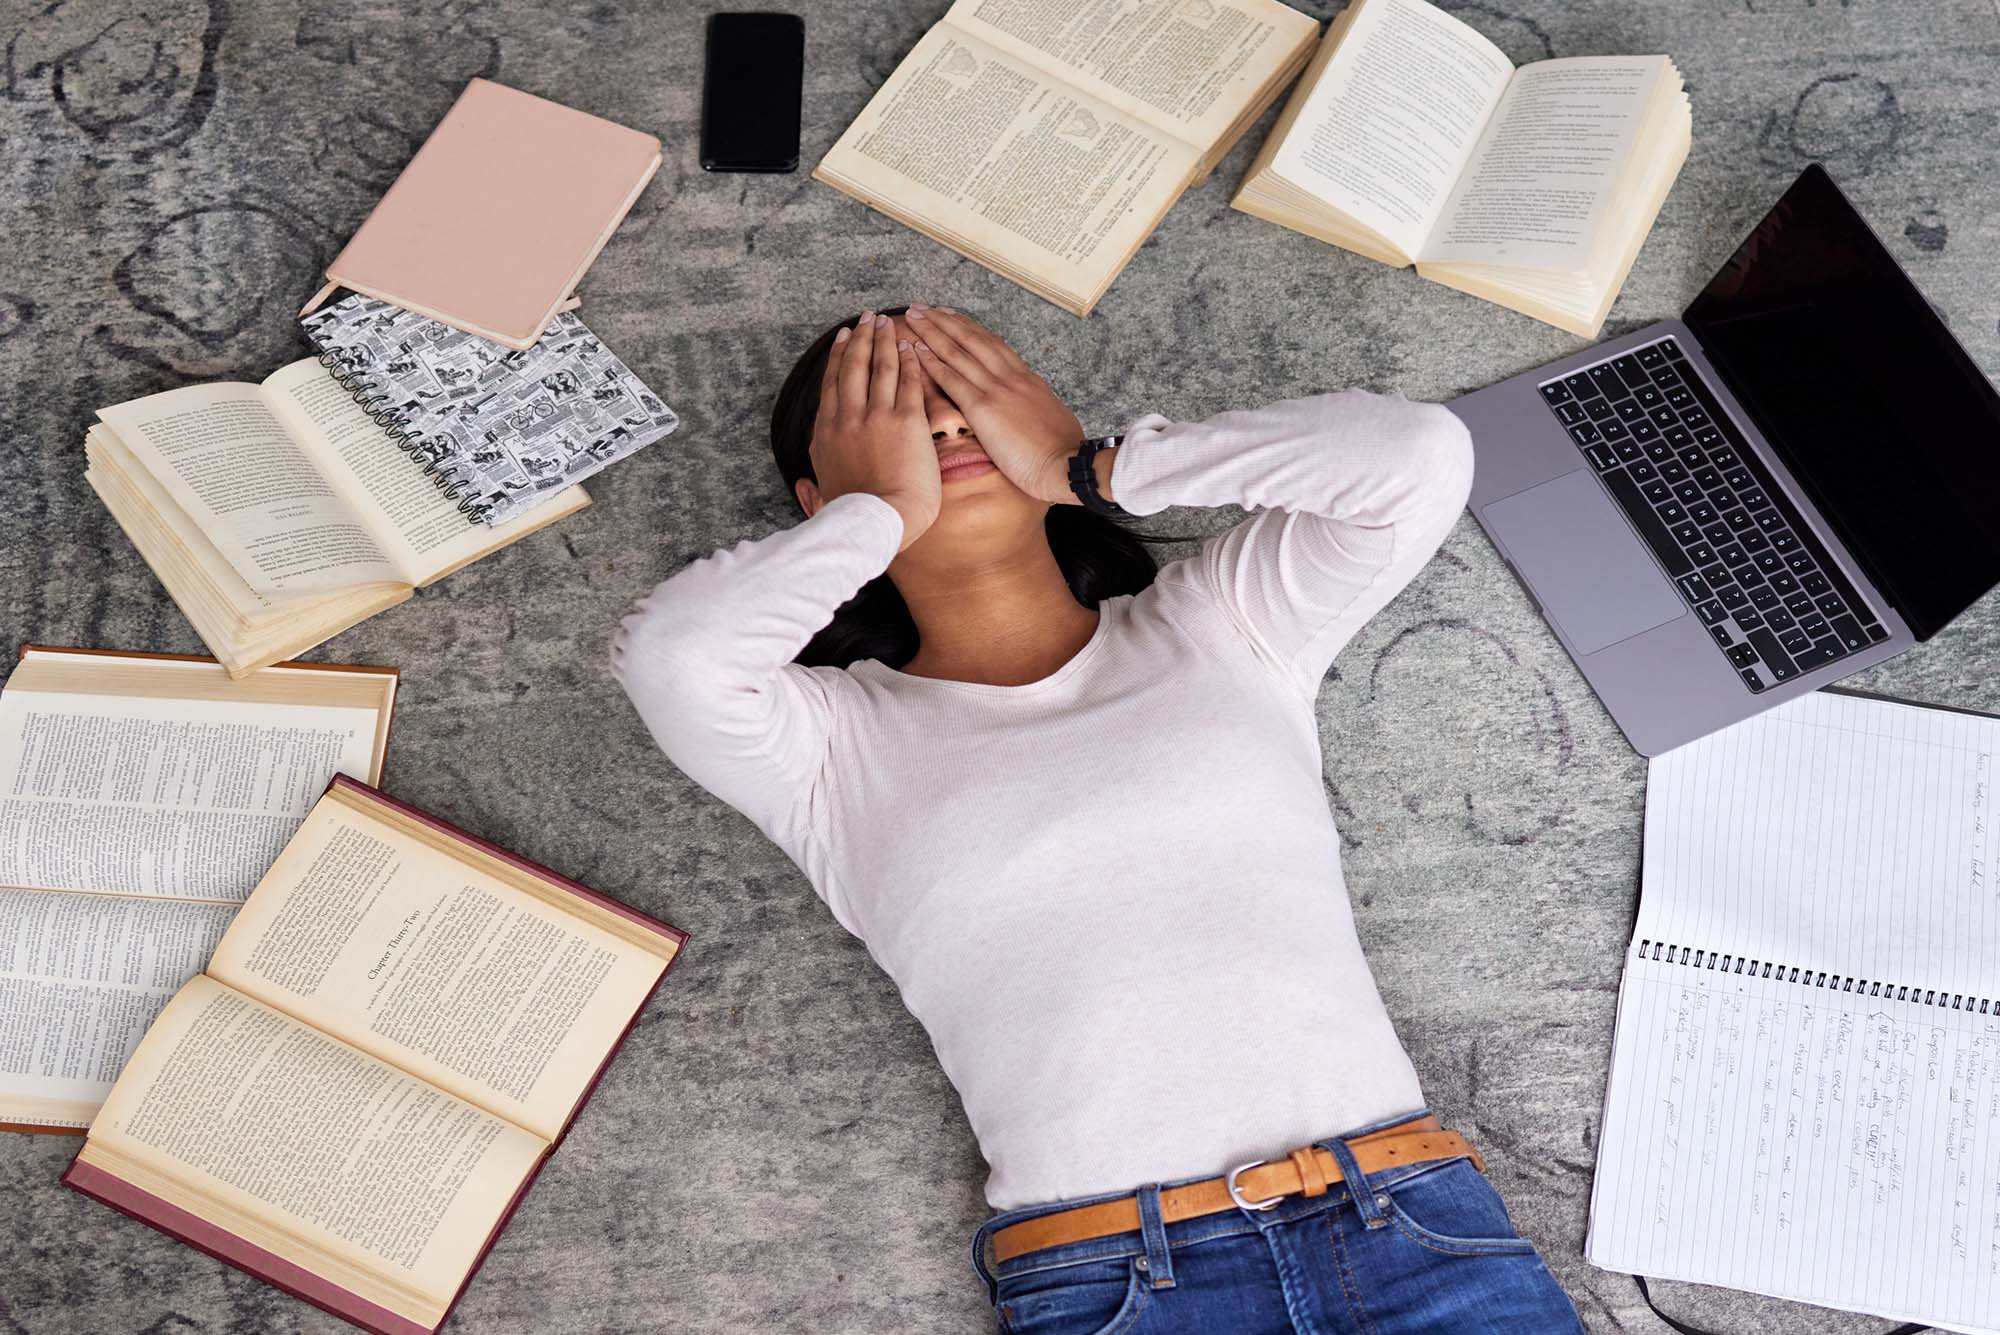 Photo: A person wearing a white top and jeans lies on the floor with hands over face in an exasperated manner. They lie among various open books, notebooks, and laptop.